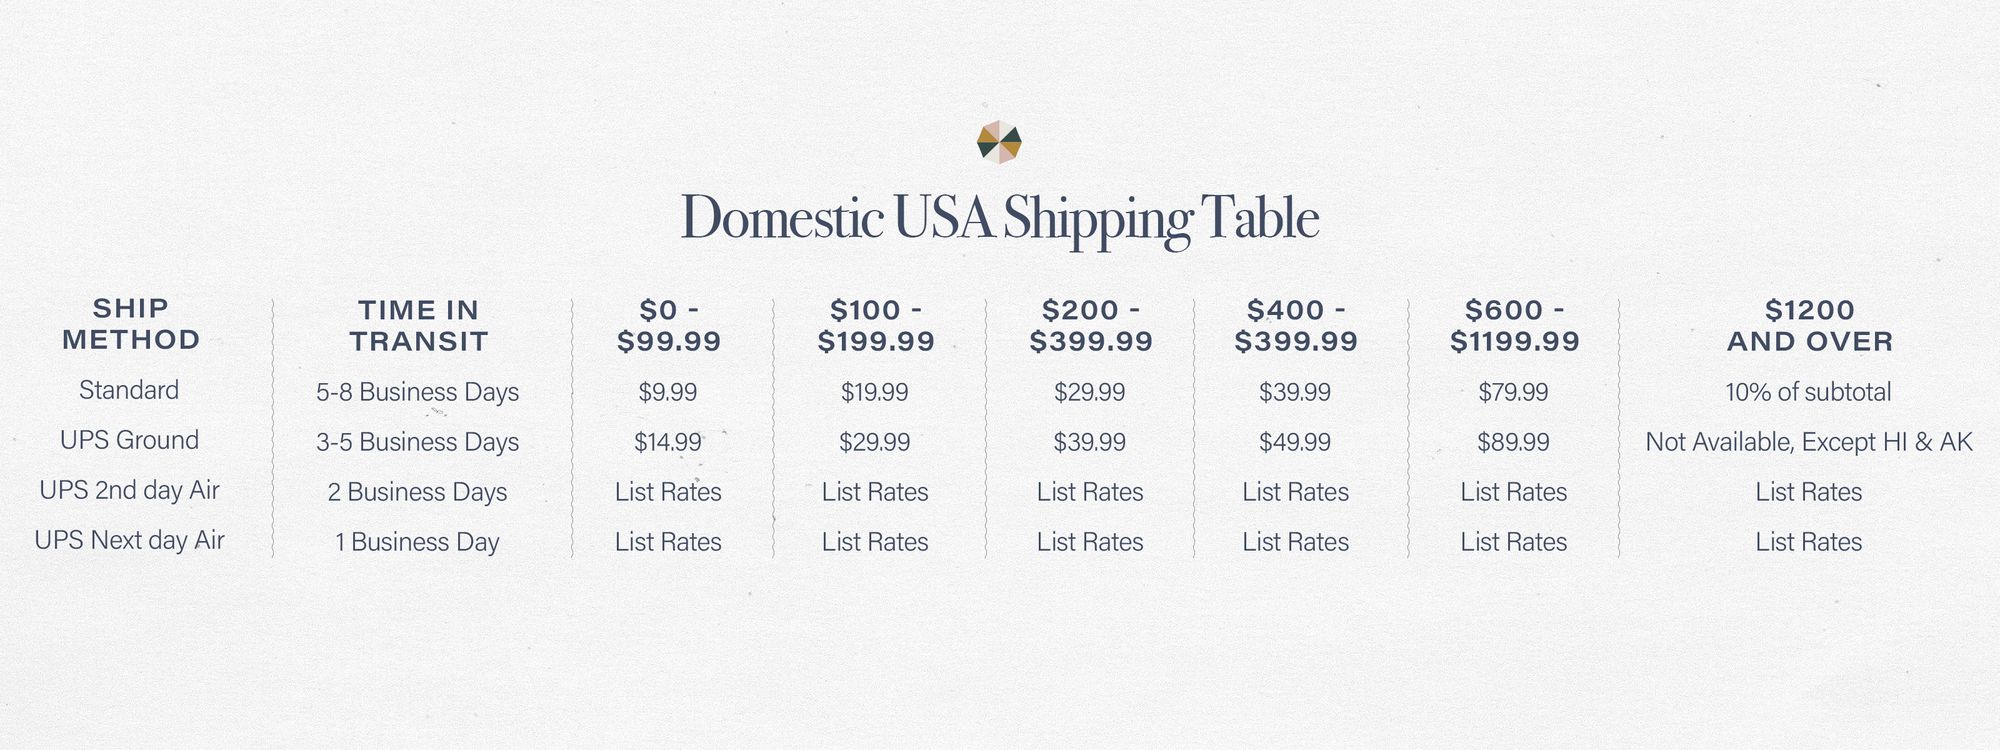 Business & Pleasure Co. Shipping Table